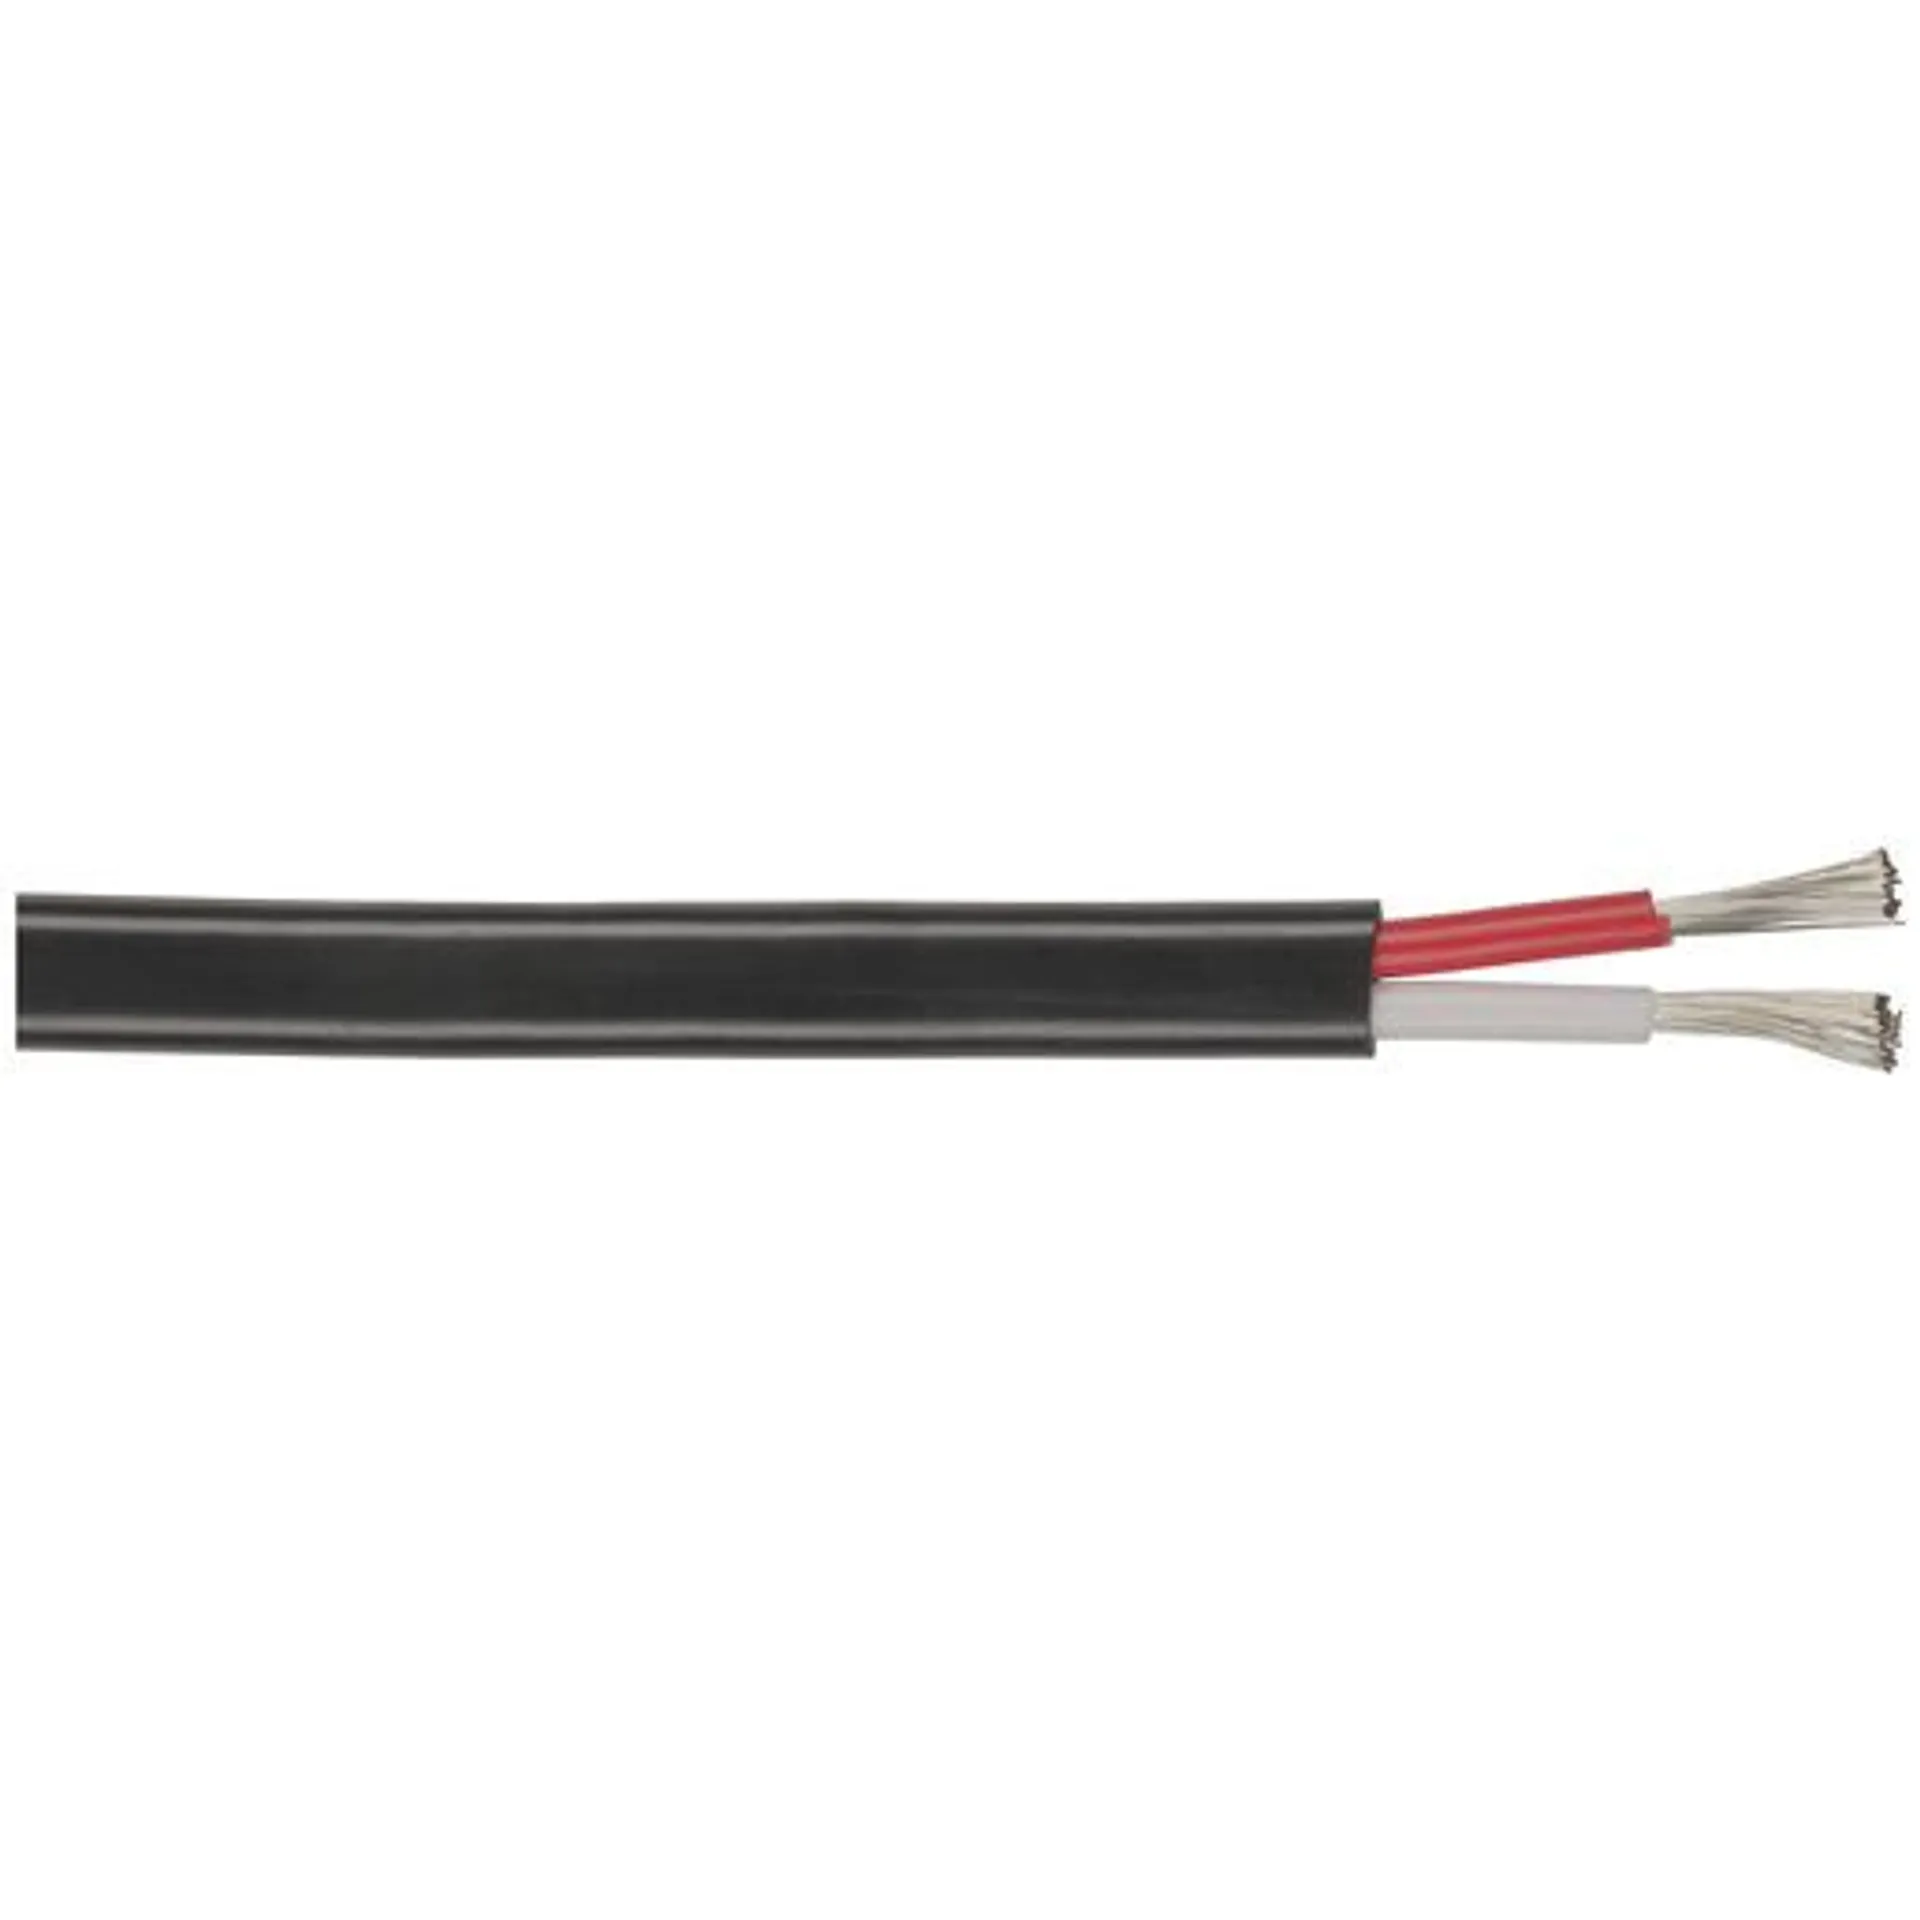 15A Twin Core Power Cable - Sold per metre